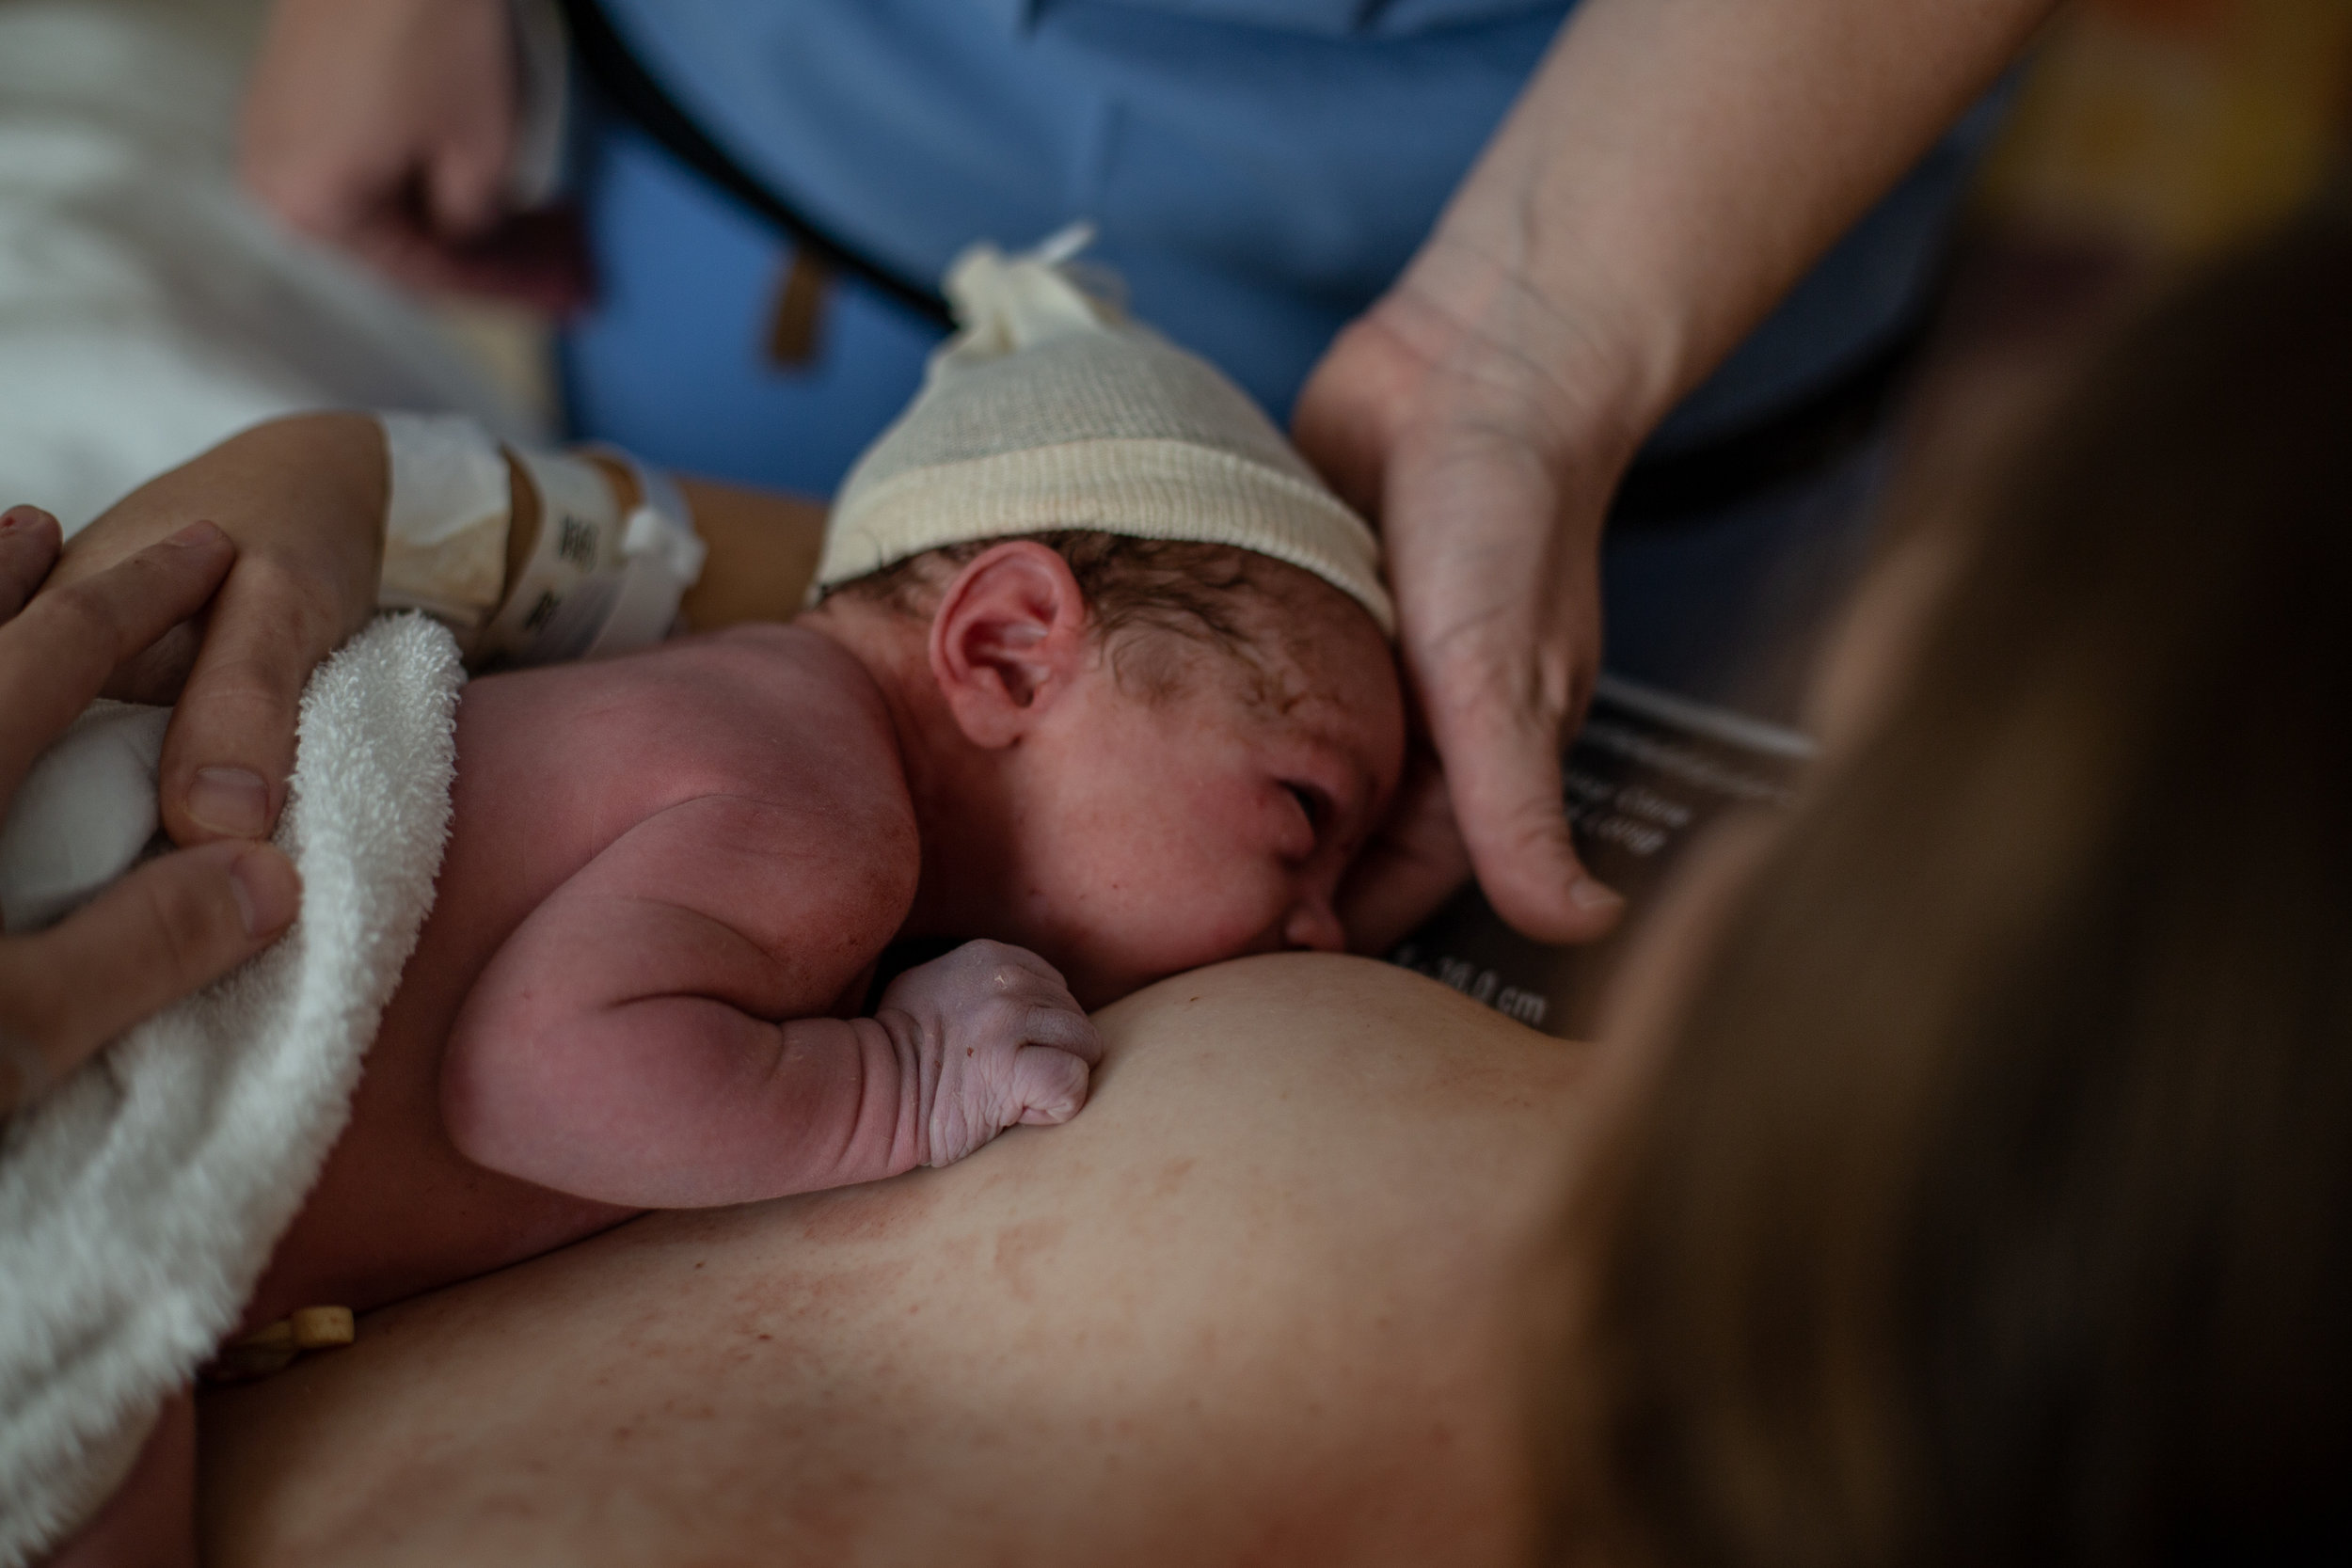 A nurse holds a newborn baby's head up to his mother's breast.